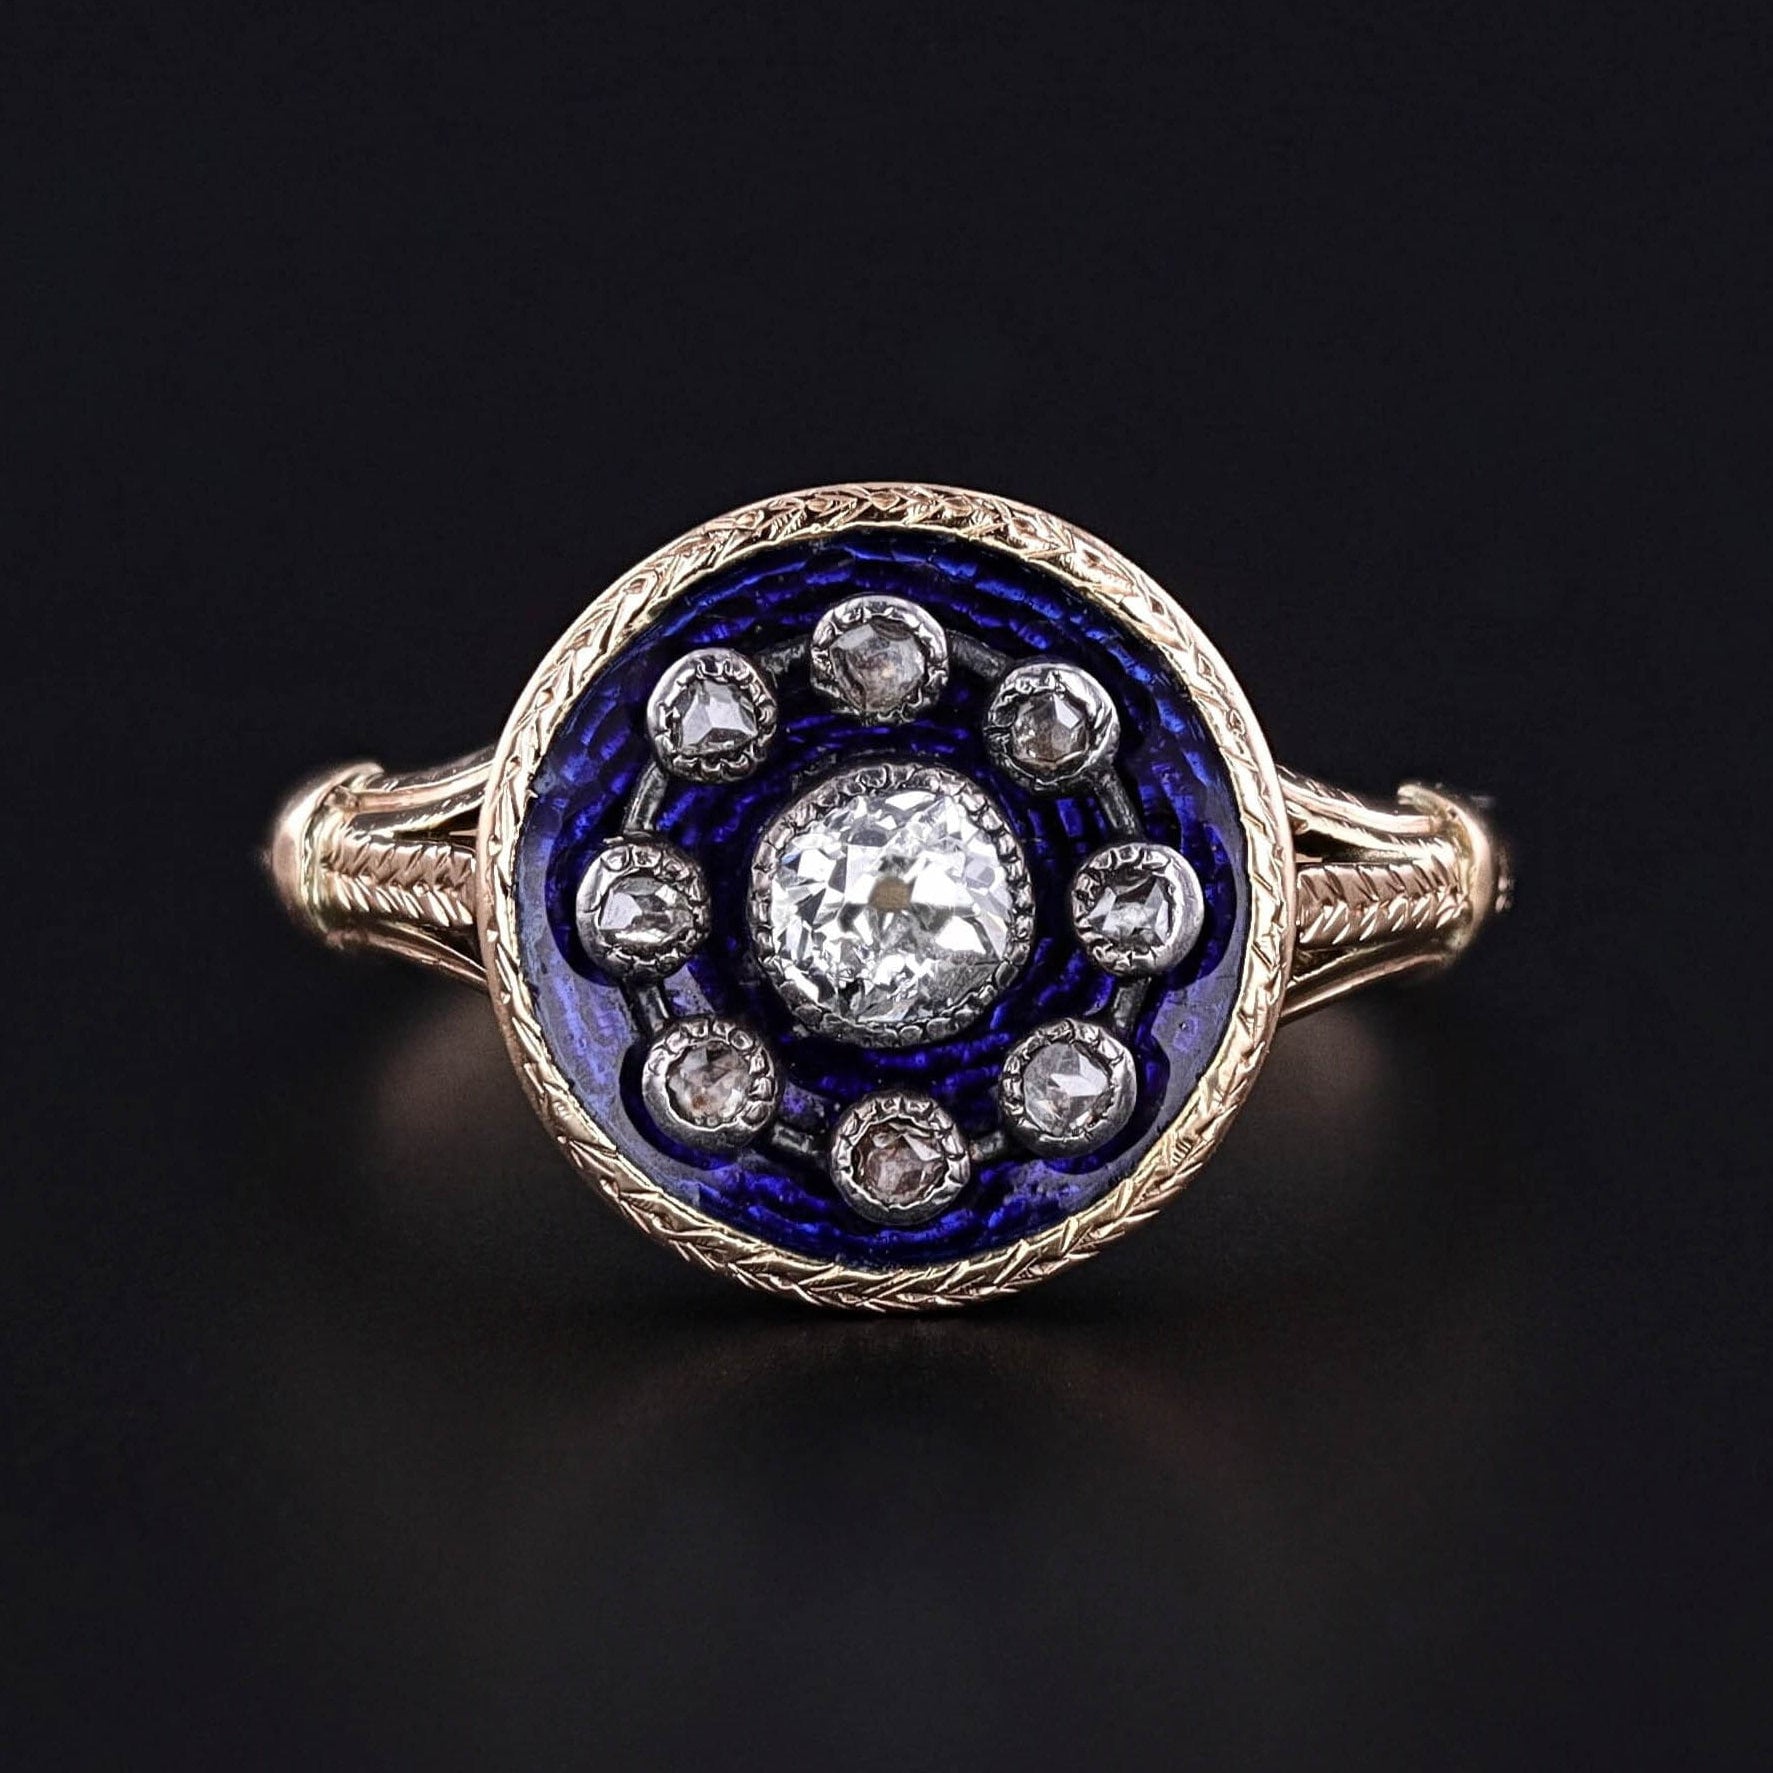 Antique Blue Enamel and Diamond Ring of 18k Gold